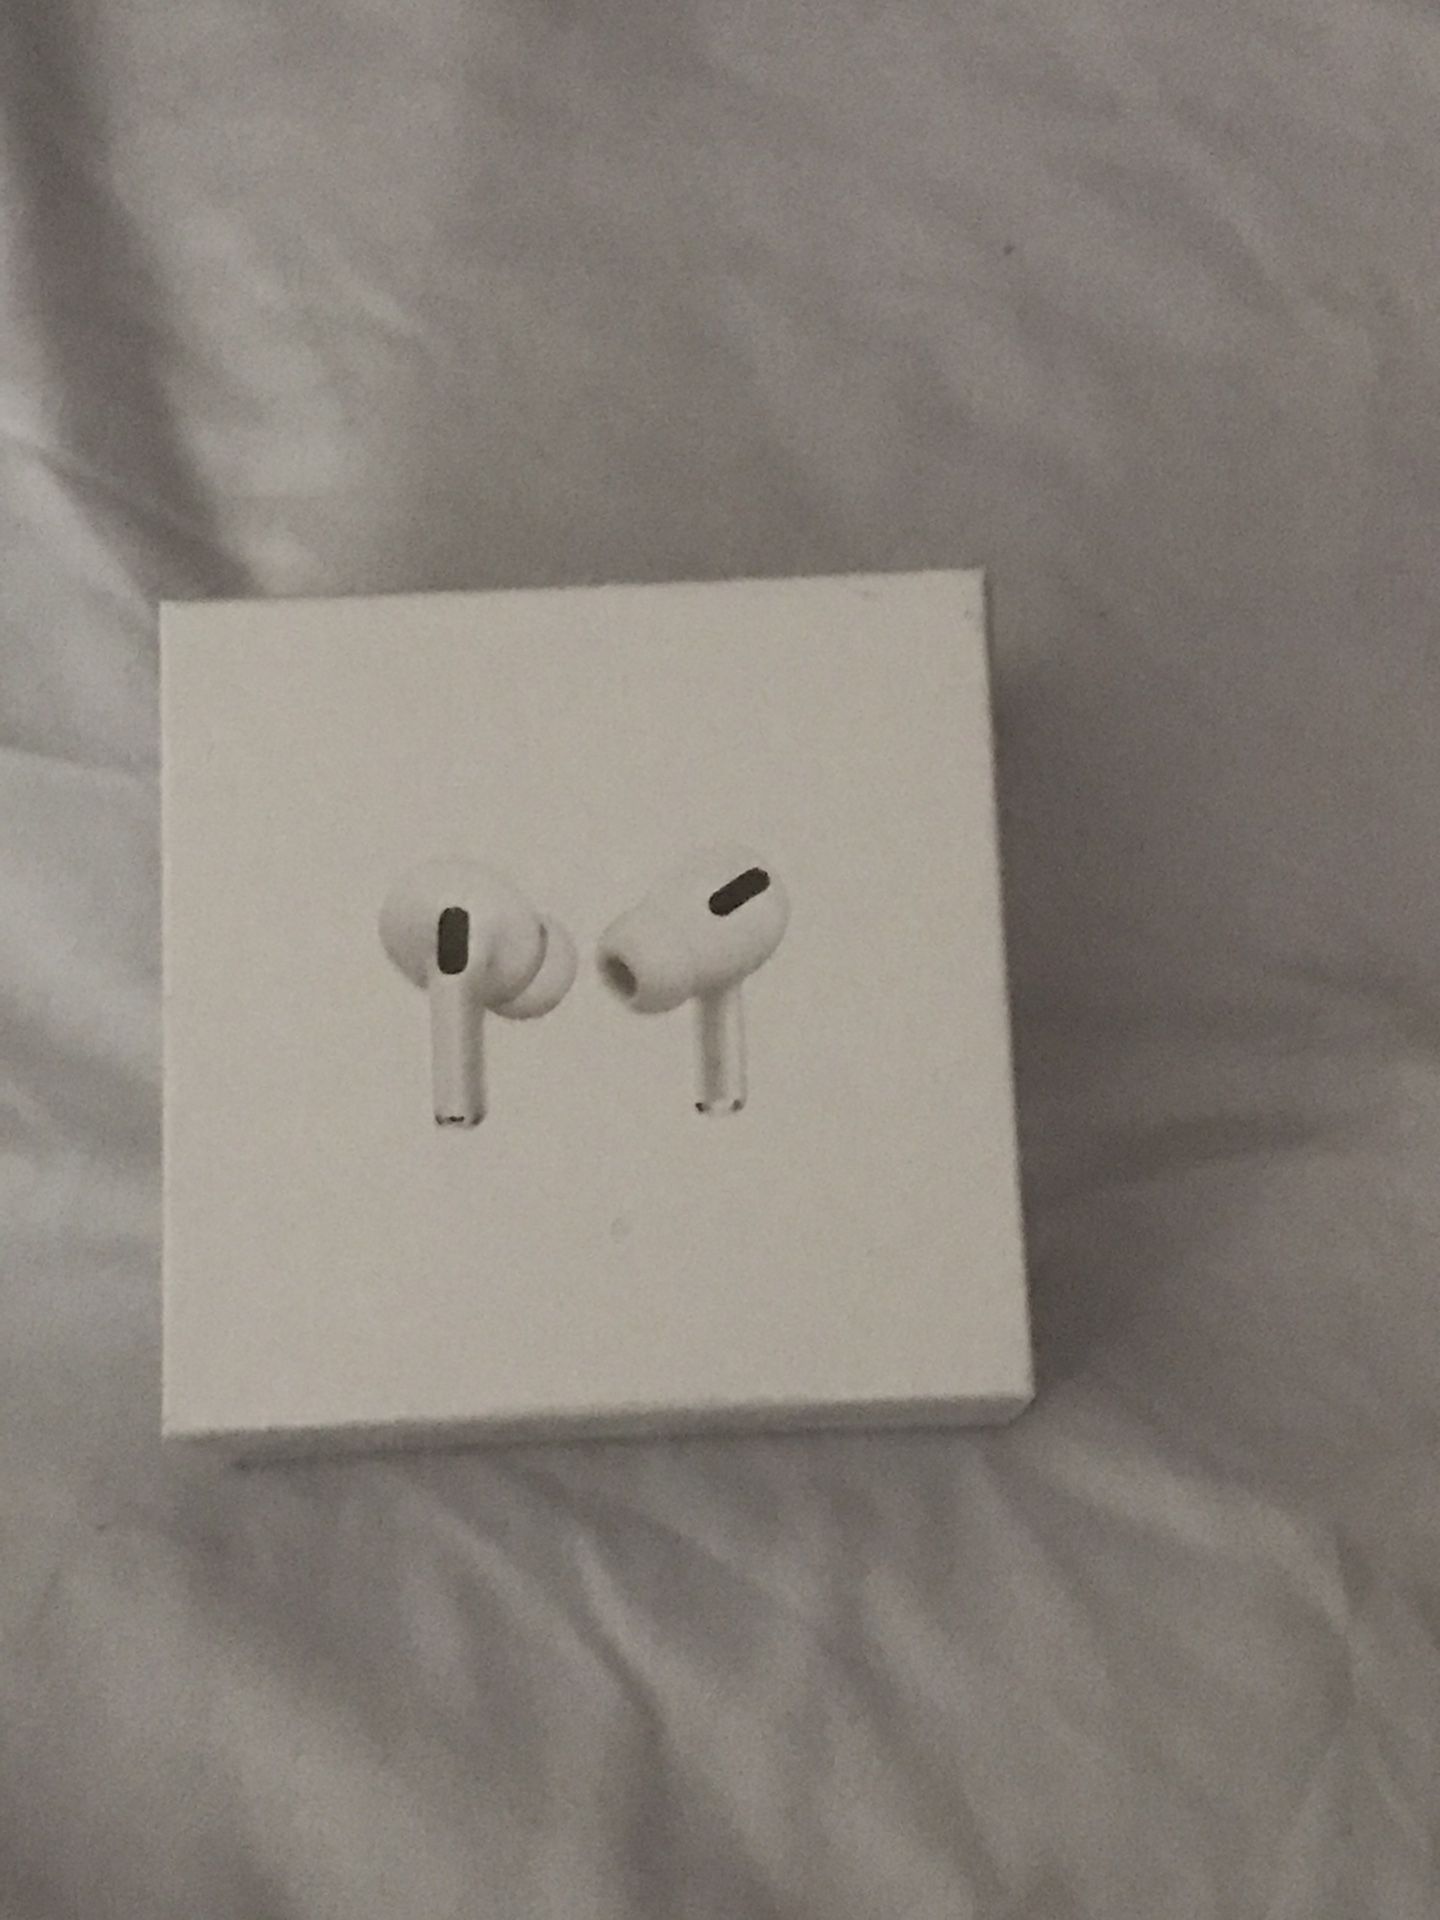 Brand New AirPods Pro